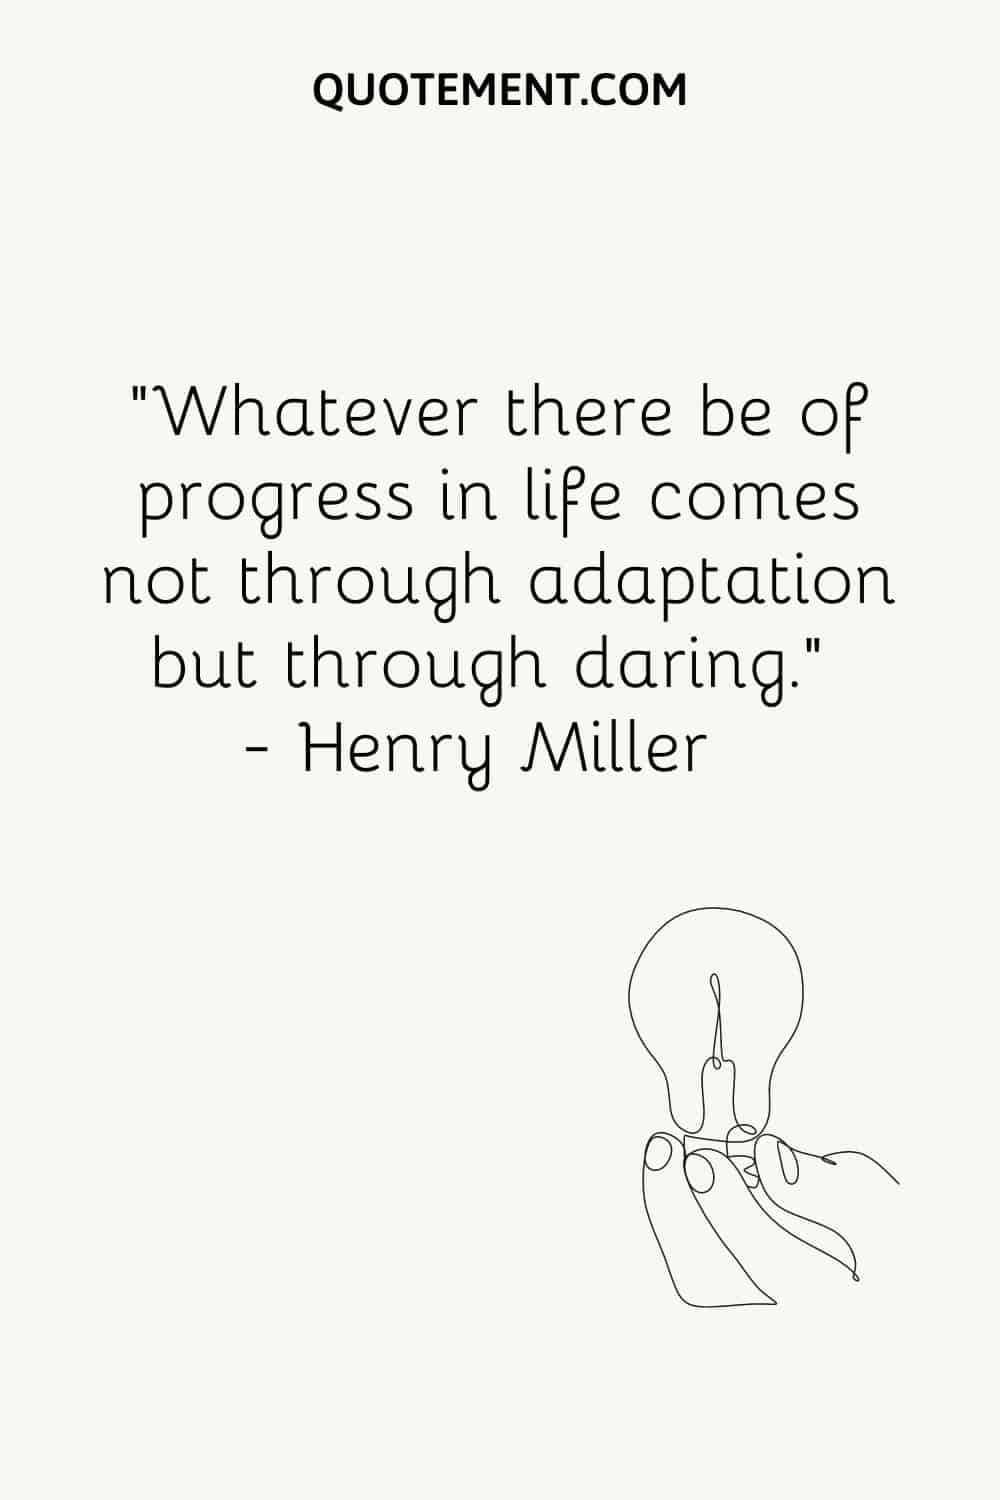 Whatever there be of progress in life comes not through adaptation but through daring